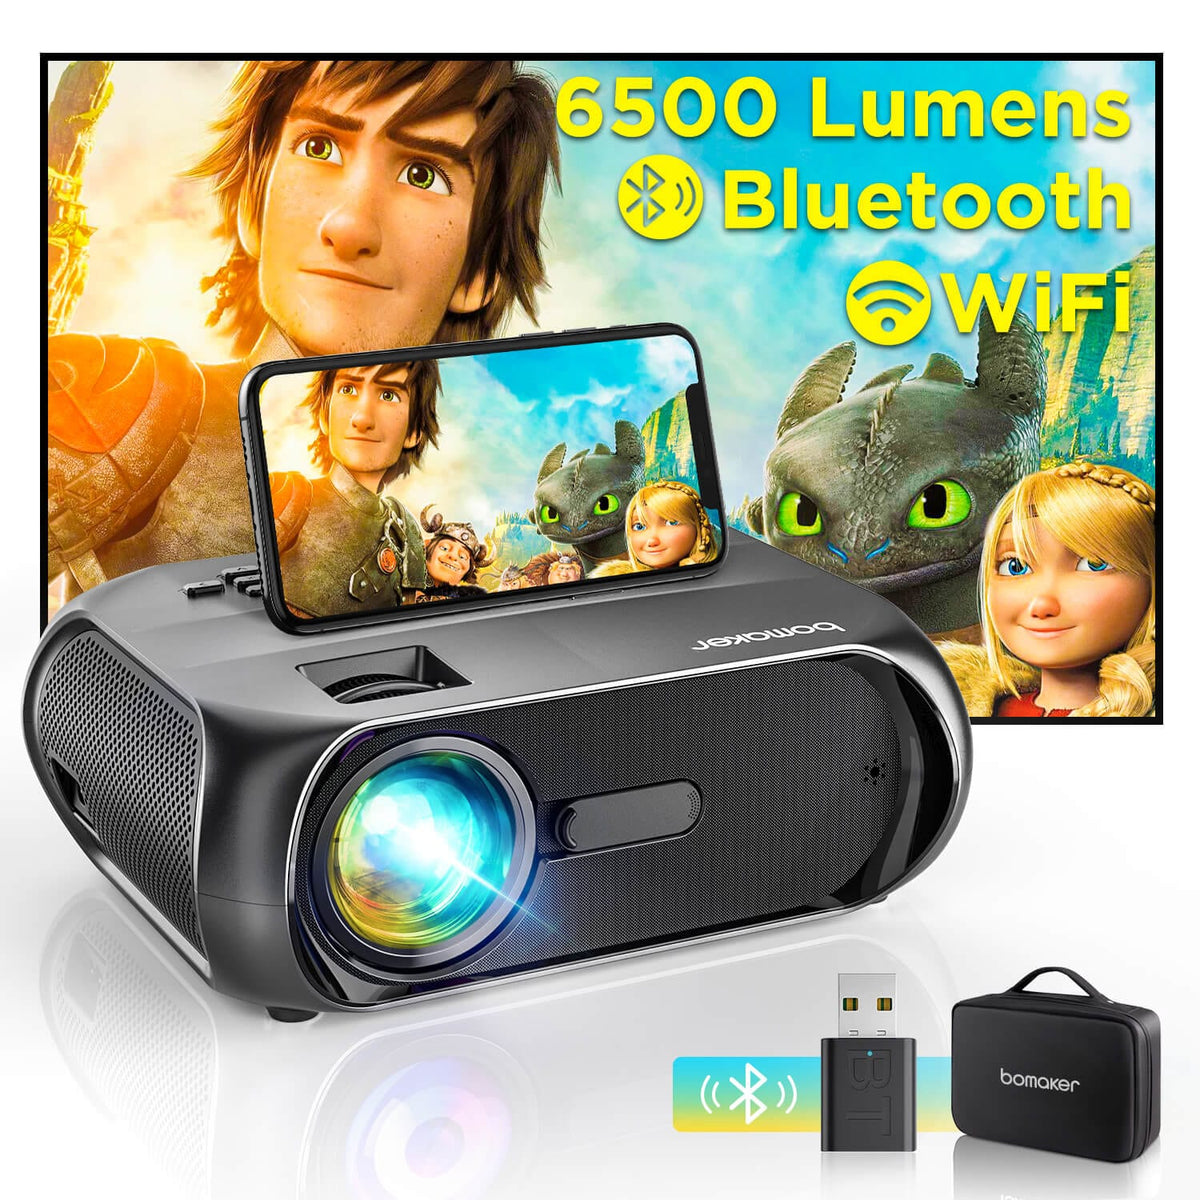 Honest Review For WiMiUS 1080P Projector With WiFi and Bluetooth